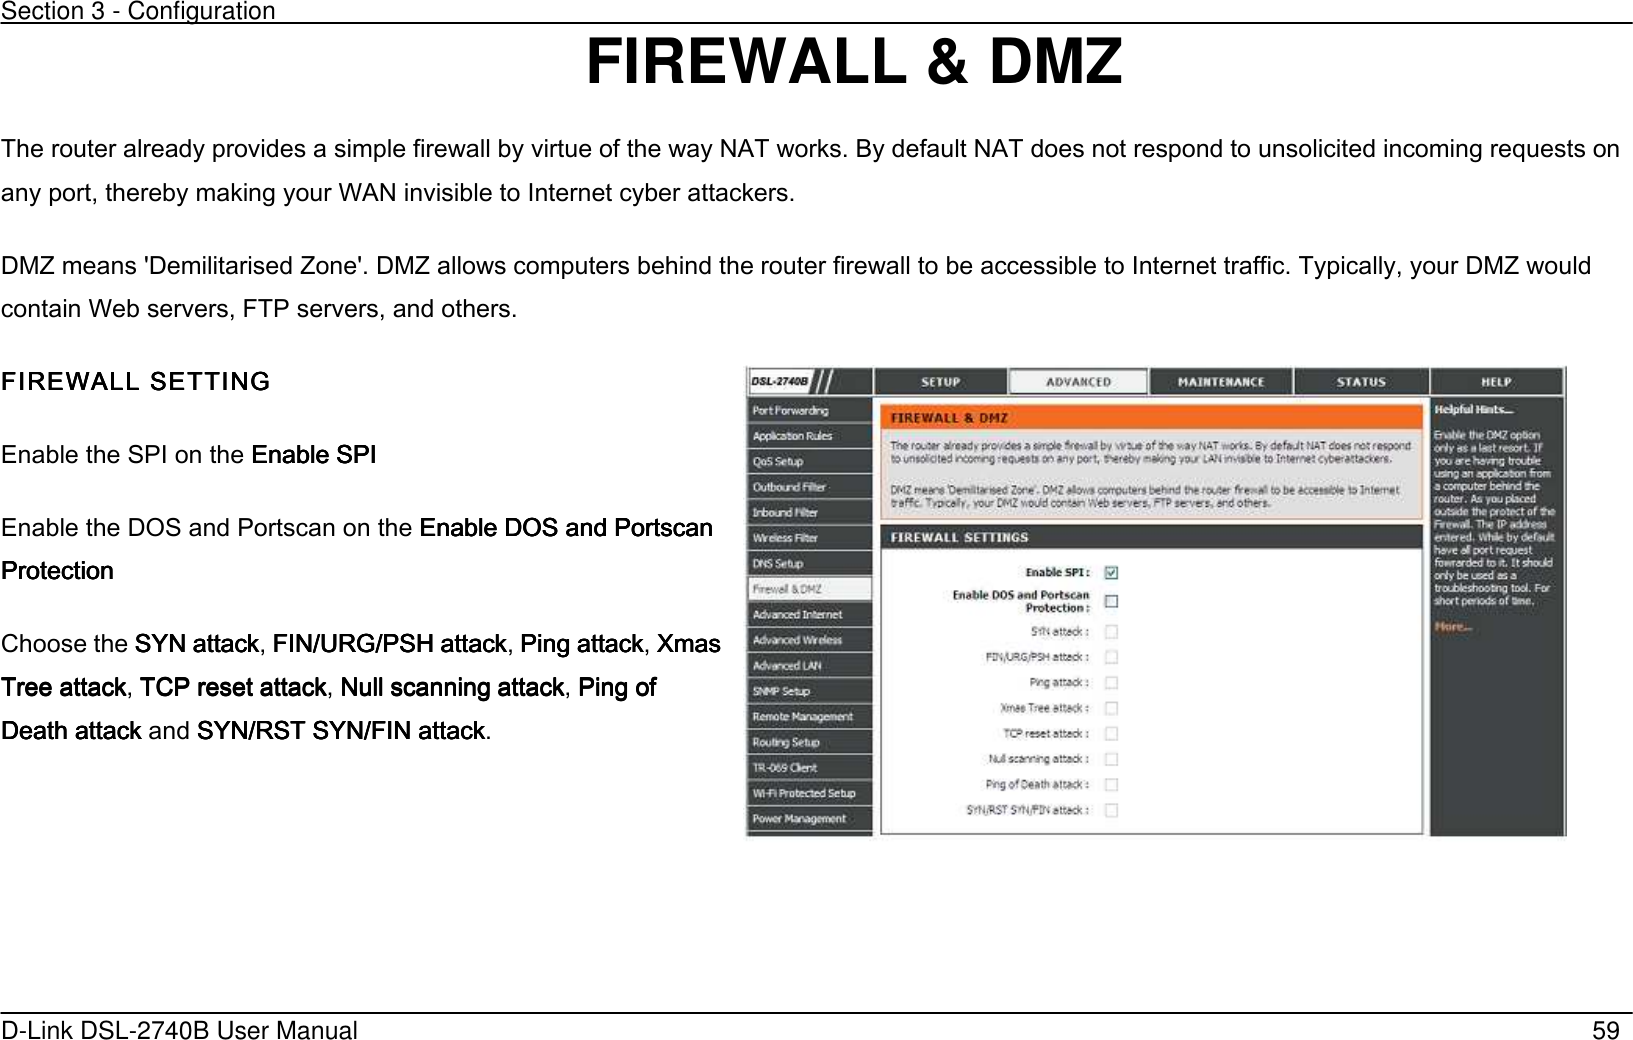 Section 3 - Configuration   D-Link DSL-2740B User Manual                                                  59 FIREWALL &amp; DMZ The router already provides a simple firewall by virtue of the way NAT works. By default NAT does not respond to unsolicited incoming requests on any port, thereby making your WAN invisible to Internet cyber attackers. DMZ means &apos;Demilitarised Zone&apos;. DMZ allows computers behind the router firewall to be accessible to Internet traffic. Typically, your DMZ would contain Web servers, FTP servers, and others. FIREWALL FIREWALL FIREWALL FIREWALL SETTINGSETTINGSETTINGSETTING    Enable the SPI on the Enable SPIEnable SPIEnable SPIEnable SPI    Enable the DOS and Portscan on the Enable DOS and Portscan Enable DOS and Portscan Enable DOS and Portscan Enable DOS and Portscan ProtectionProtectionProtectionProtection        Choose the SYN attackSYN attackSYN attackSYN attack, FIN/URG/PSH attackFIN/URG/PSH attackFIN/URG/PSH attackFIN/URG/PSH attack, Ping attackPing attackPing attackPing attack, Xmas Xmas Xmas Xmas Tree attackTree attackTree attackTree attack, TCP rTCP rTCP rTCP reset attackeset attackeset attackeset attack, Null scanning attackNull scanning attackNull scanning attackNull scanning attack, Ping of Ping of Ping of Ping of Death attackDeath attackDeath attackDeath attack and SYN/RST SYN/FIN attackSYN/RST SYN/FIN attackSYN/RST SYN/FIN attackSYN/RST SYN/FIN attack.      